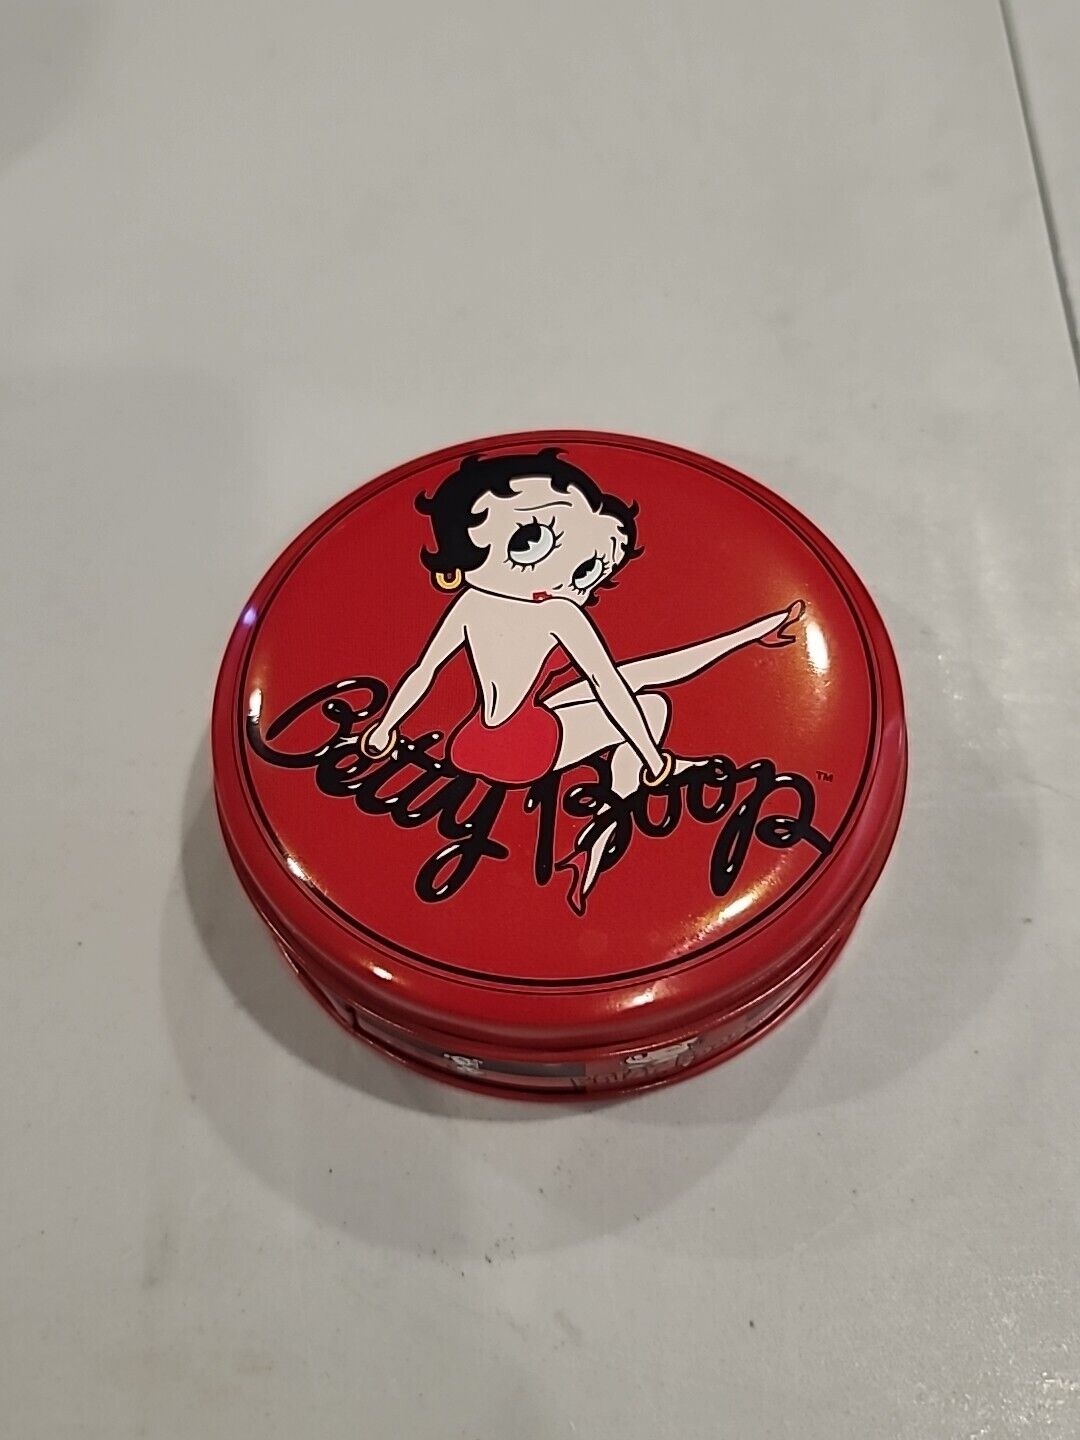 BETTY BOOP 2002 RIX SERIES 1 Collectible Coasters IN TIN CASE SET OF 4